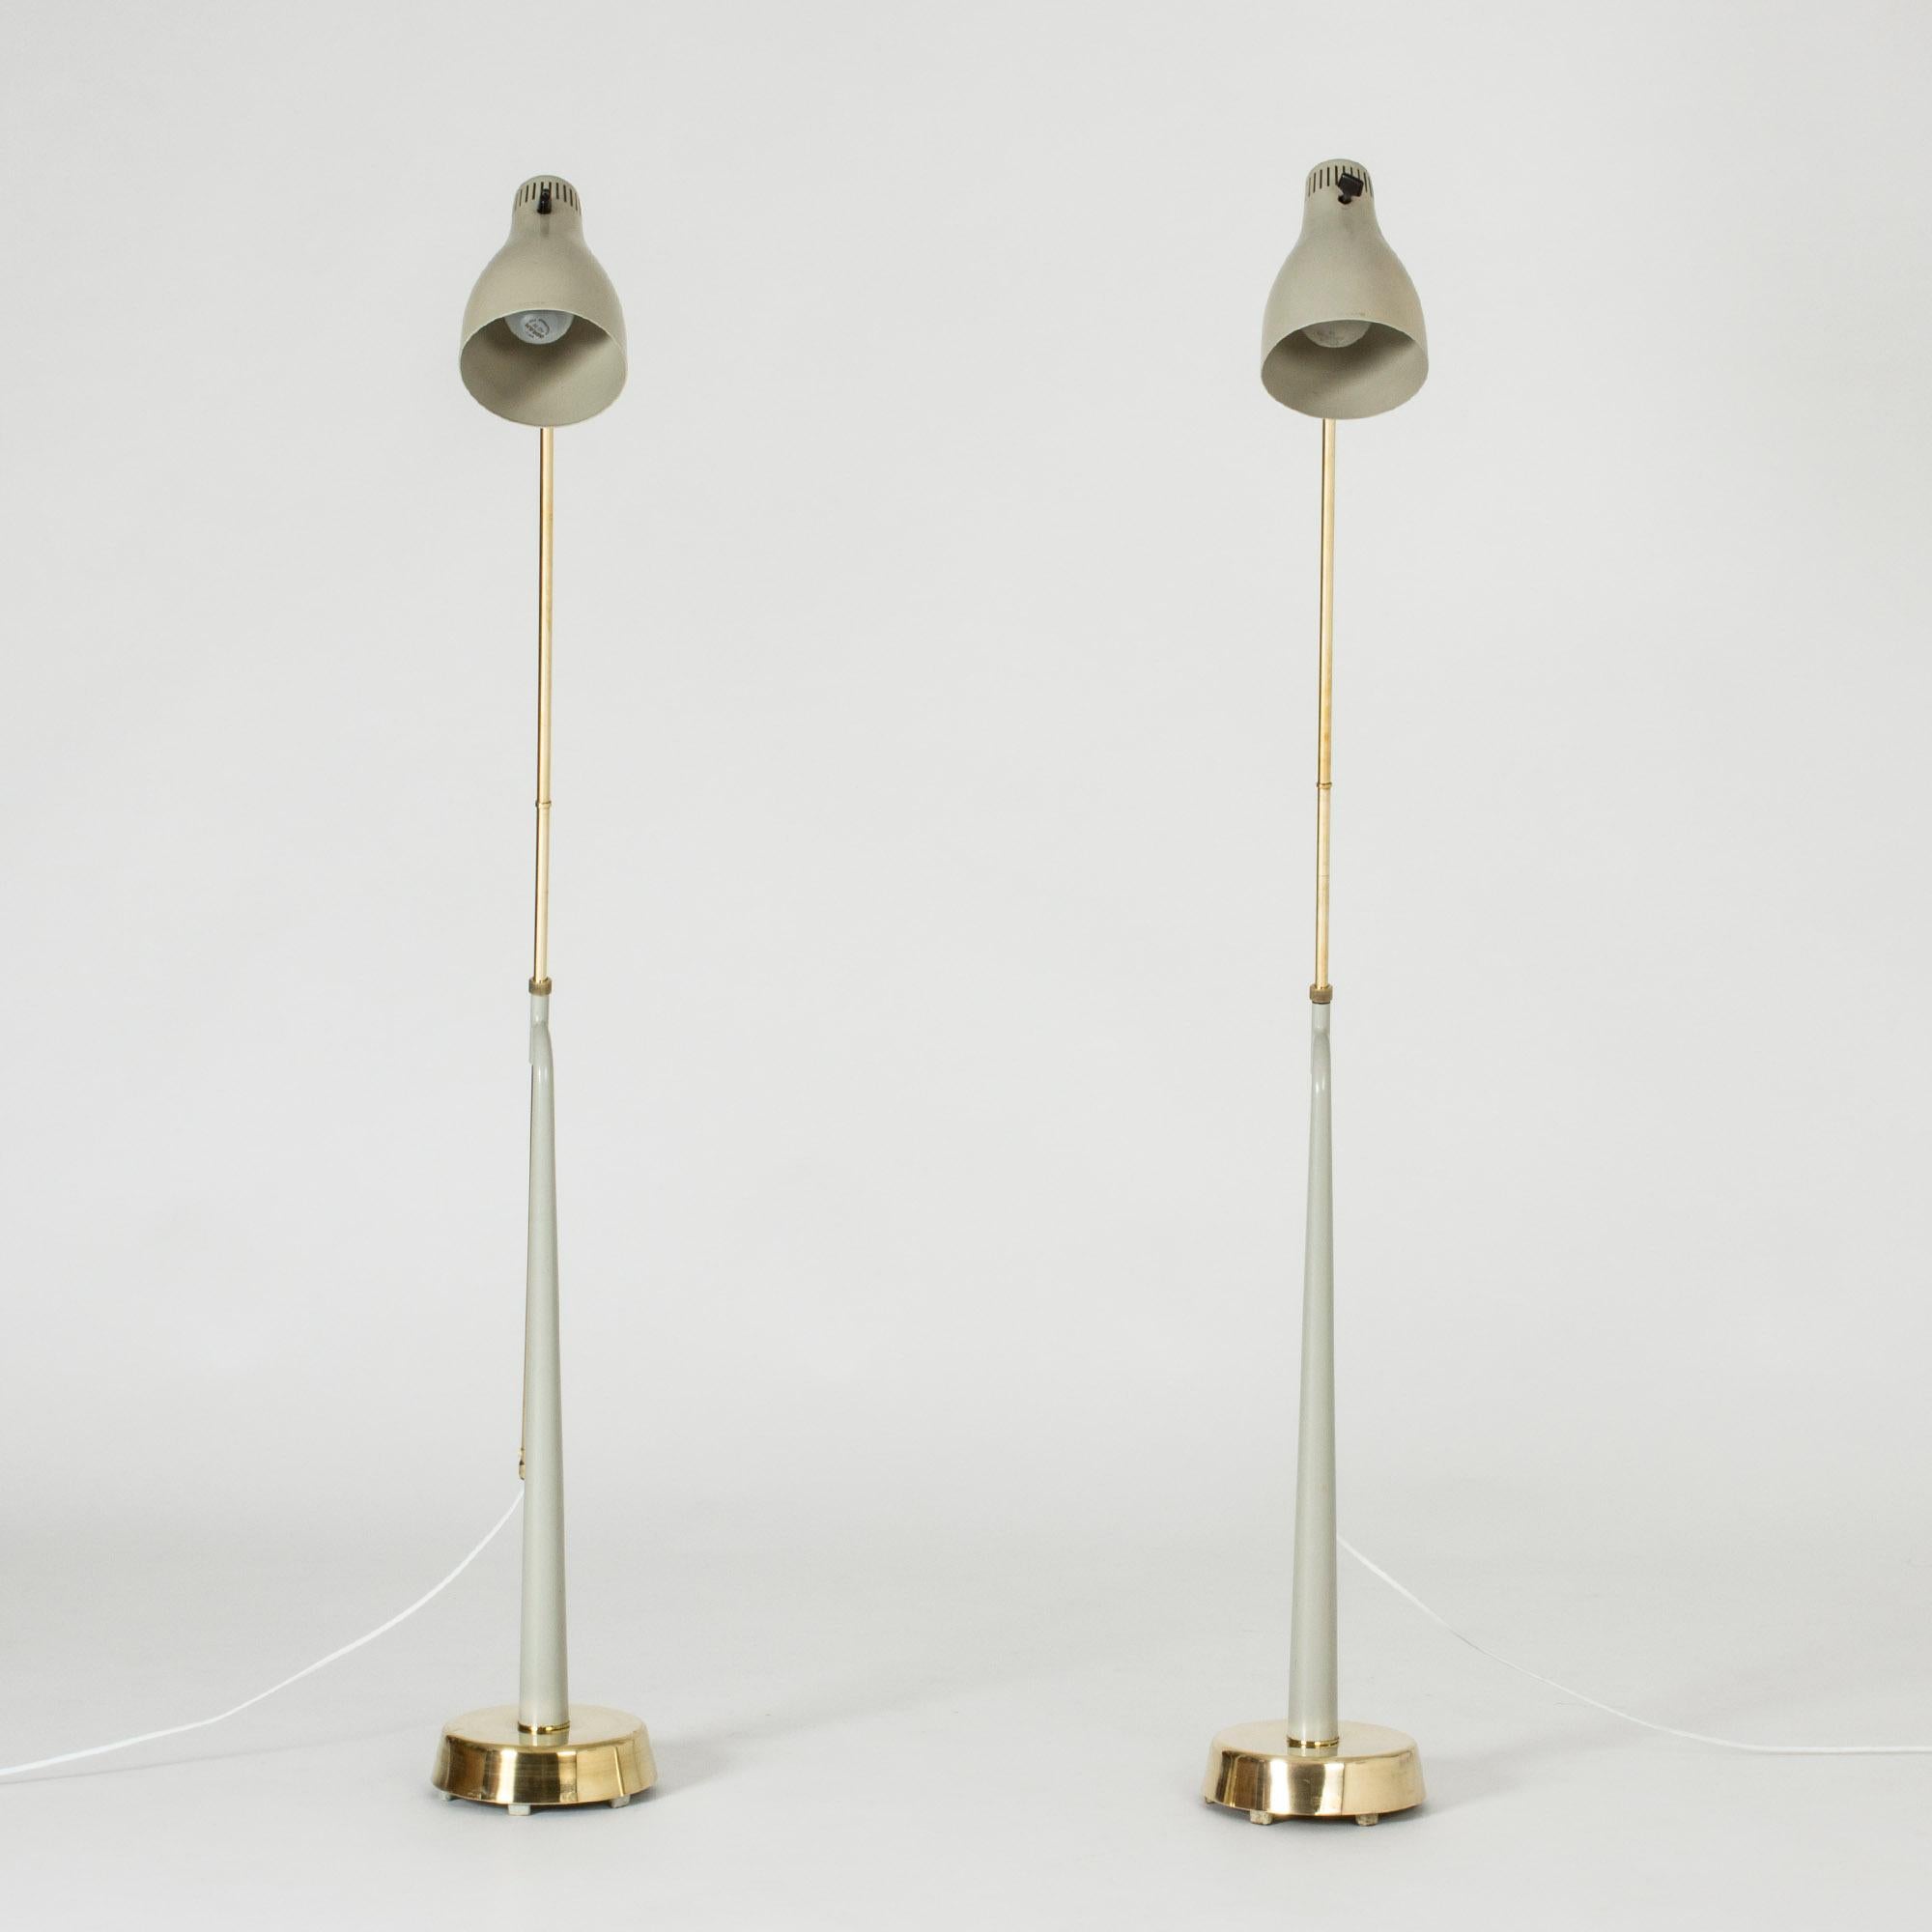 Pair of amazing floor lamps by Hans Bergström, made from brass and light grey lacquered metal. Adjustable height by sliding the brass poles through the holes of the bases. Cool, well made and elegant.

Height 116-162 cm.